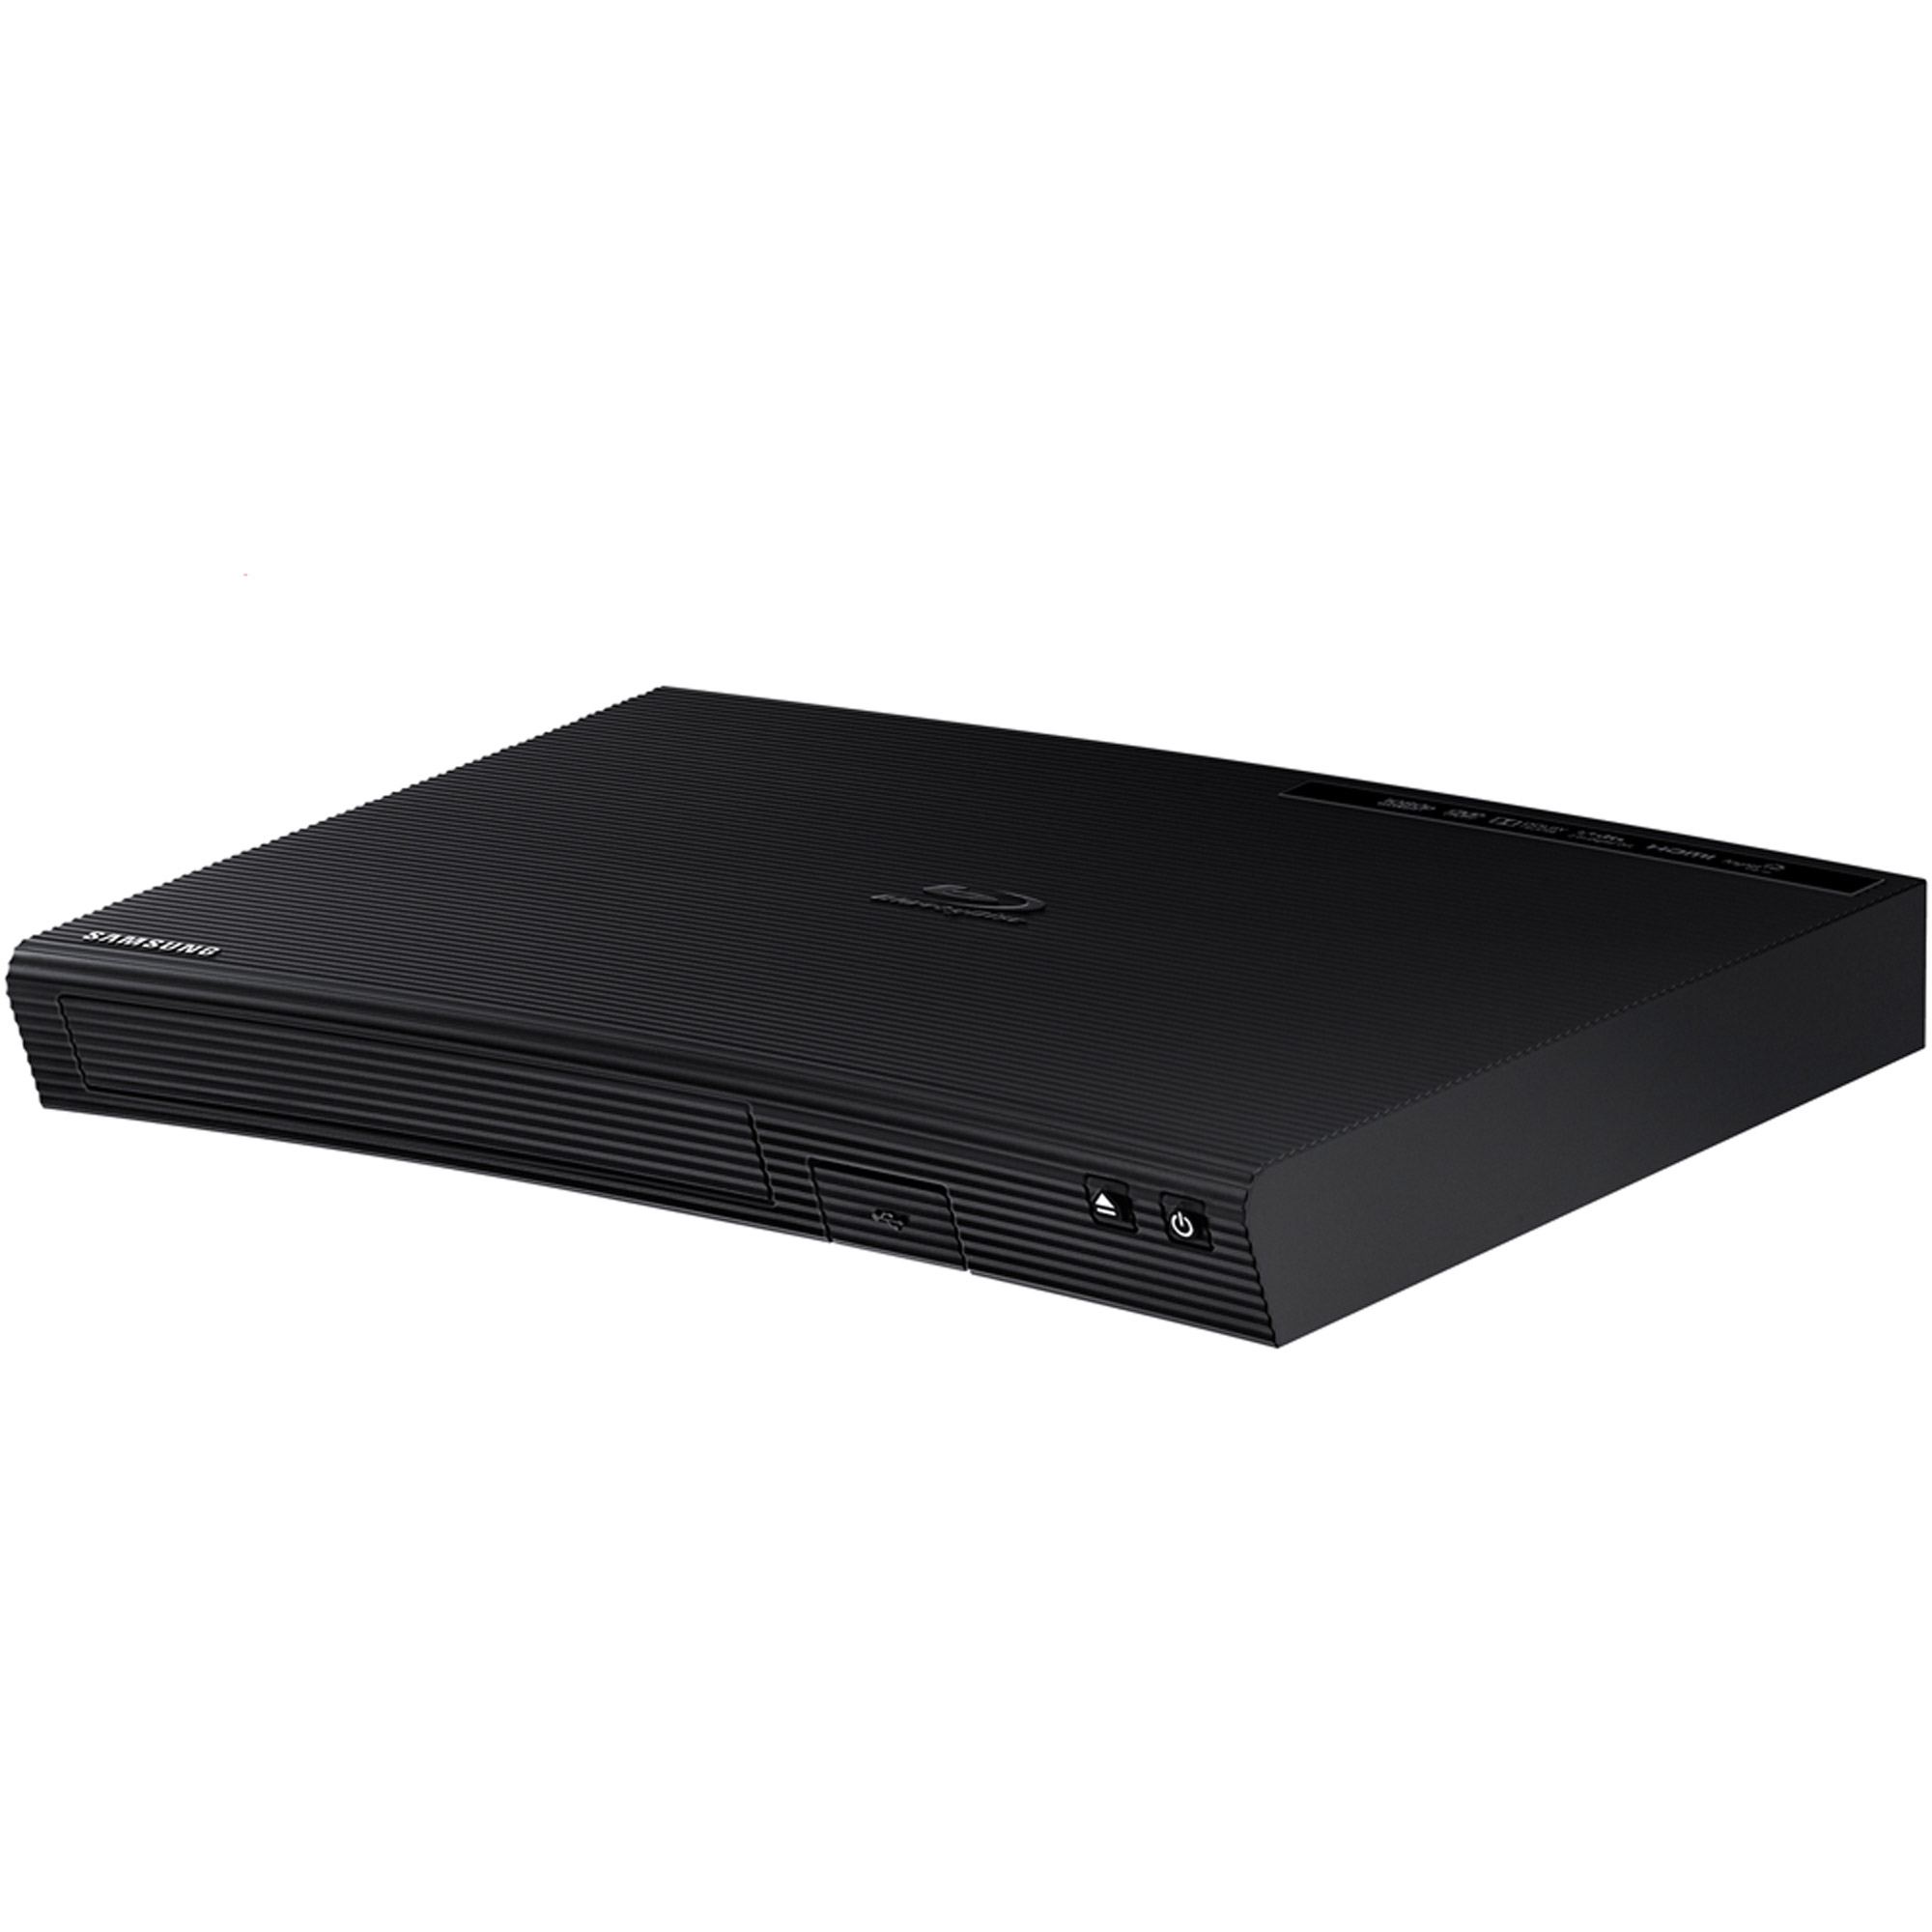 SAMSUNG Blu-Ray & DVD Player with Streaming - BD-JM51 - image 2 of 4